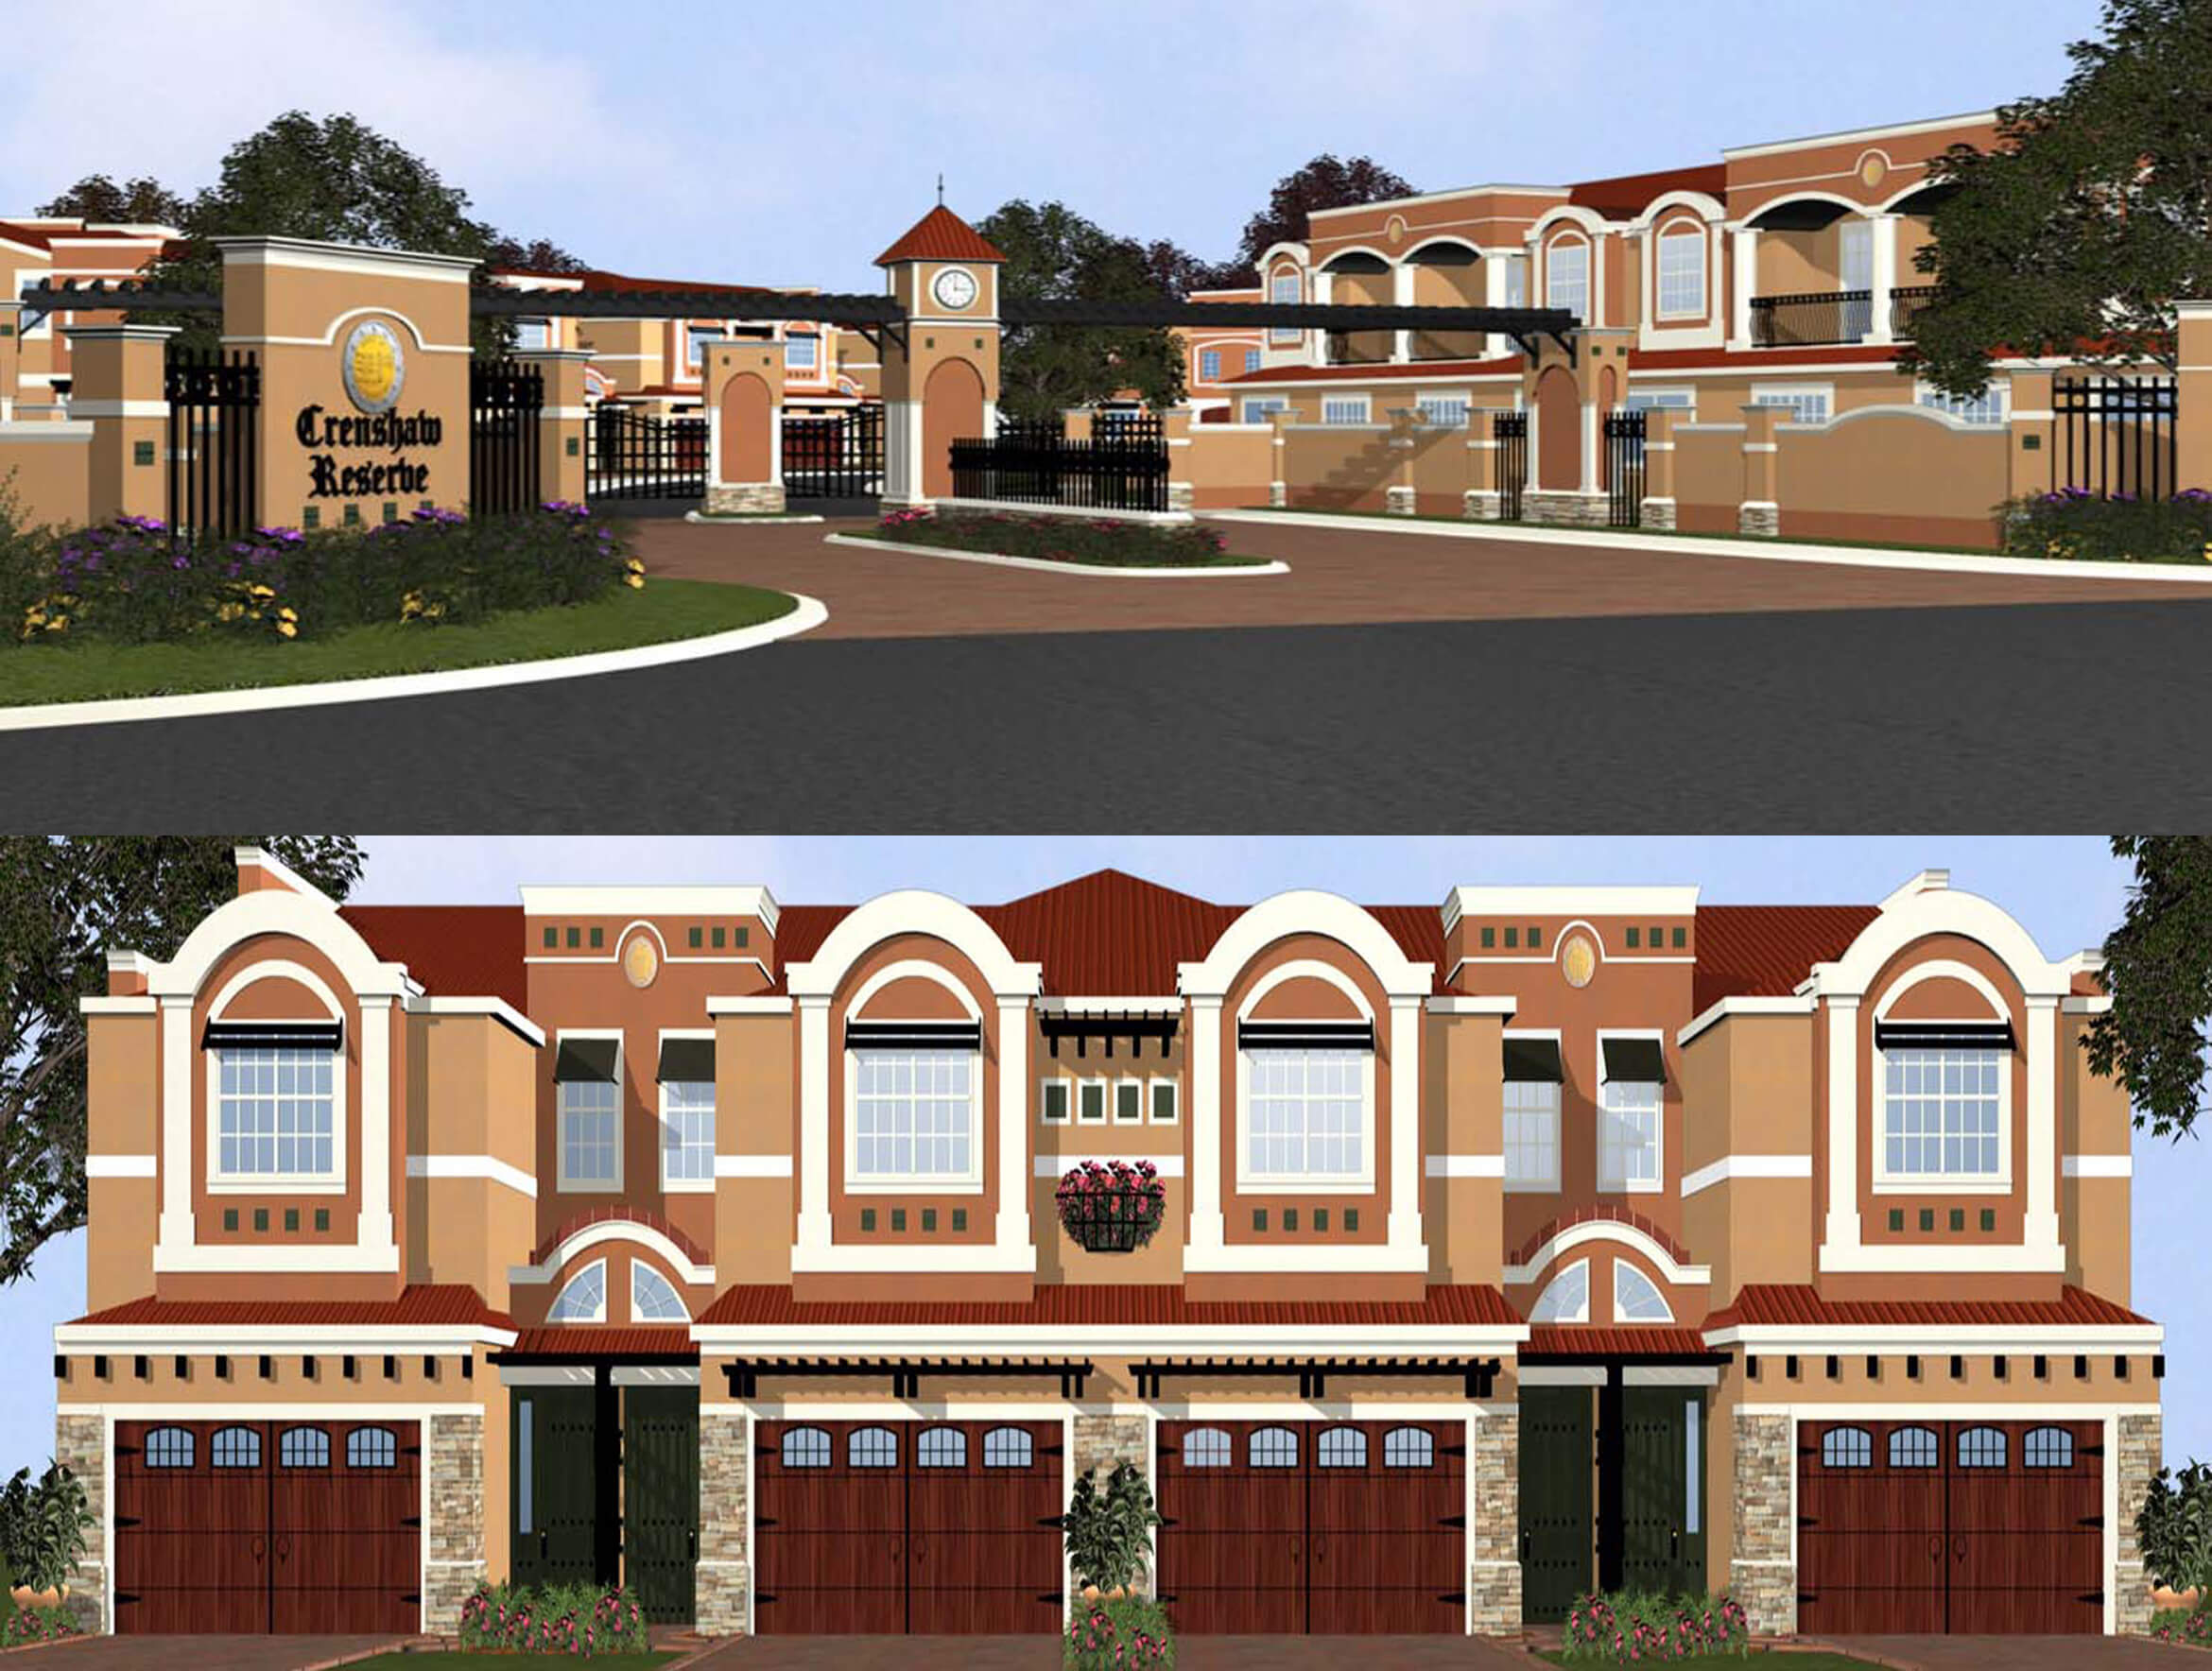 Crenshaw Reserve Townhomes